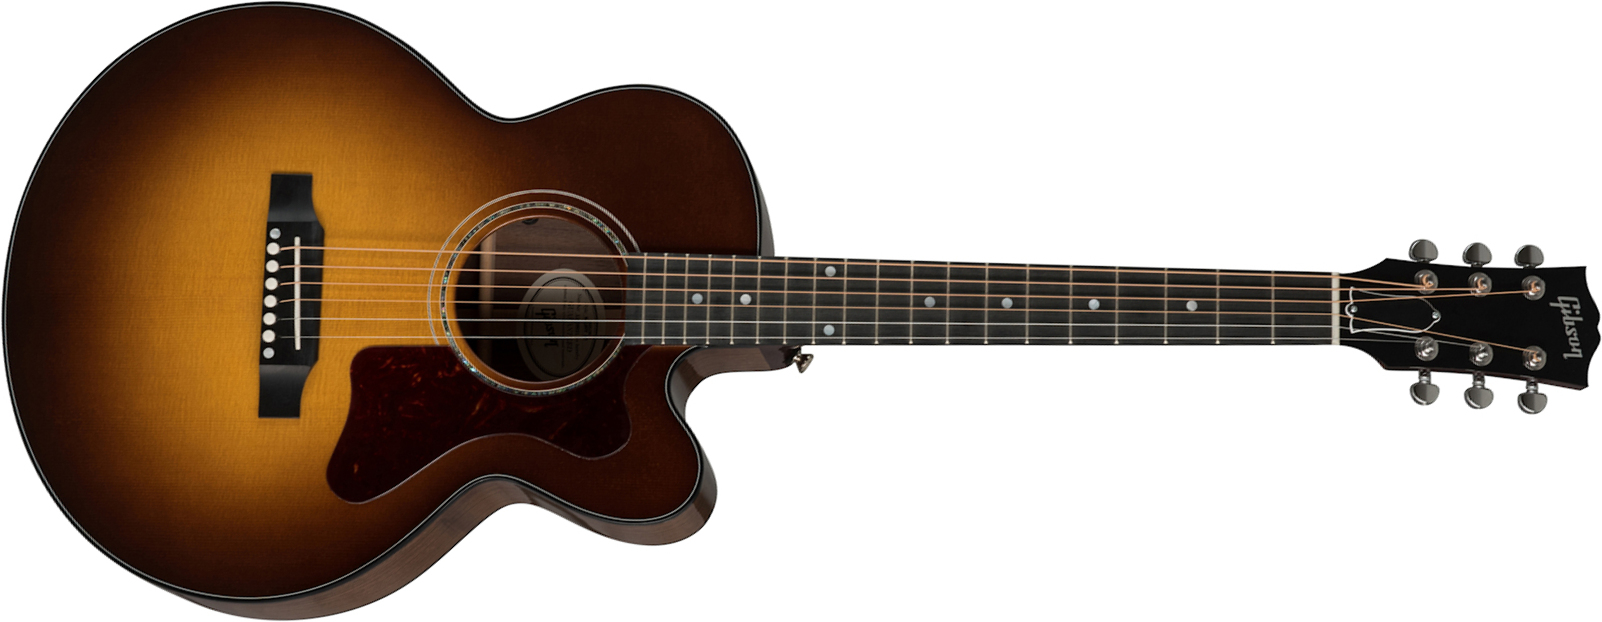 Gibson Parlor Walnut M 2019 Small Body Cw Epicea Noyer Ric - Walnut Burst - Acoustic guitar & electro - Main picture